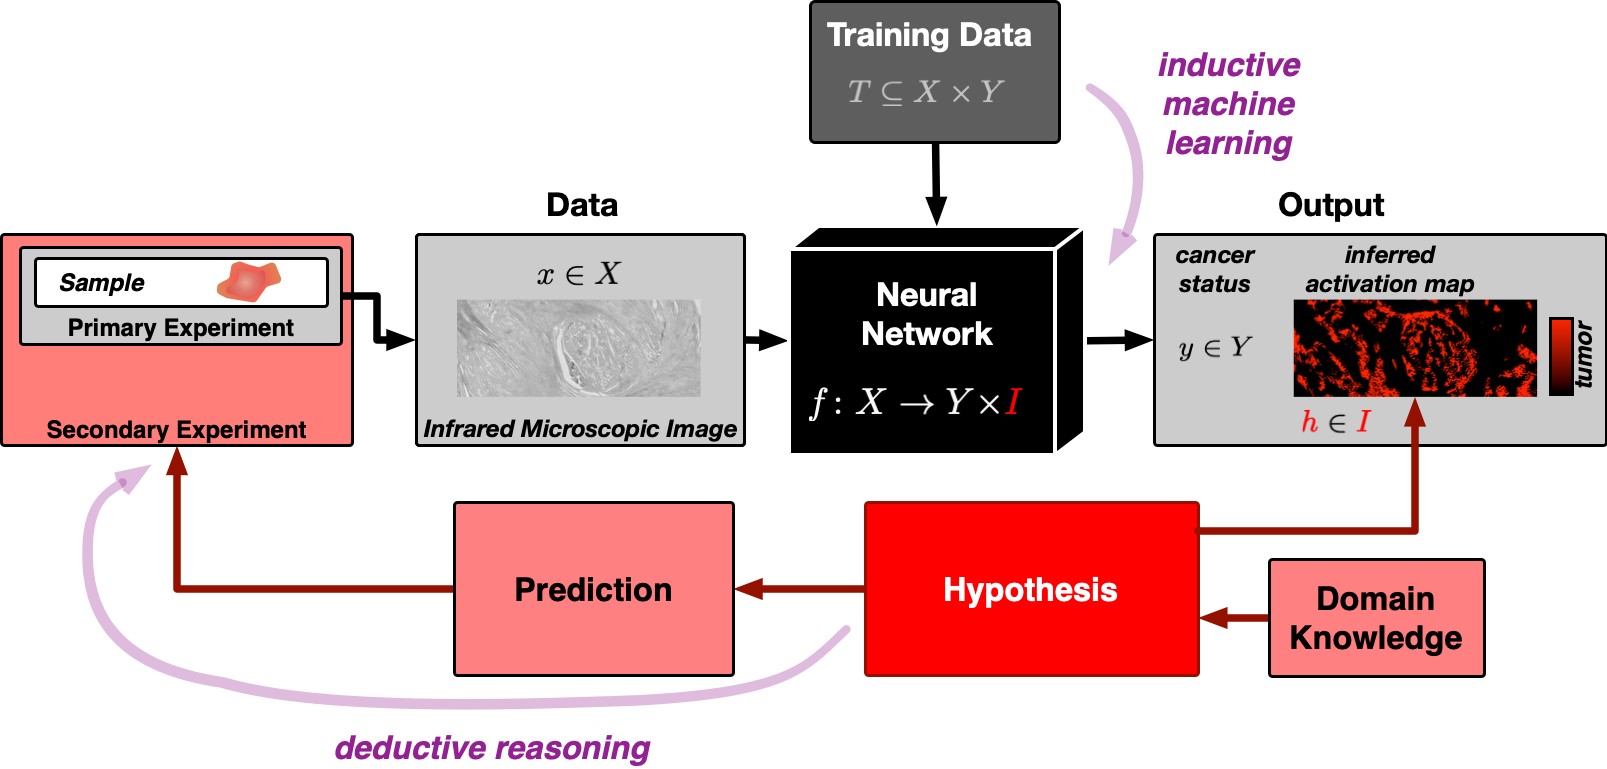 neural network is initially trained with many data sets